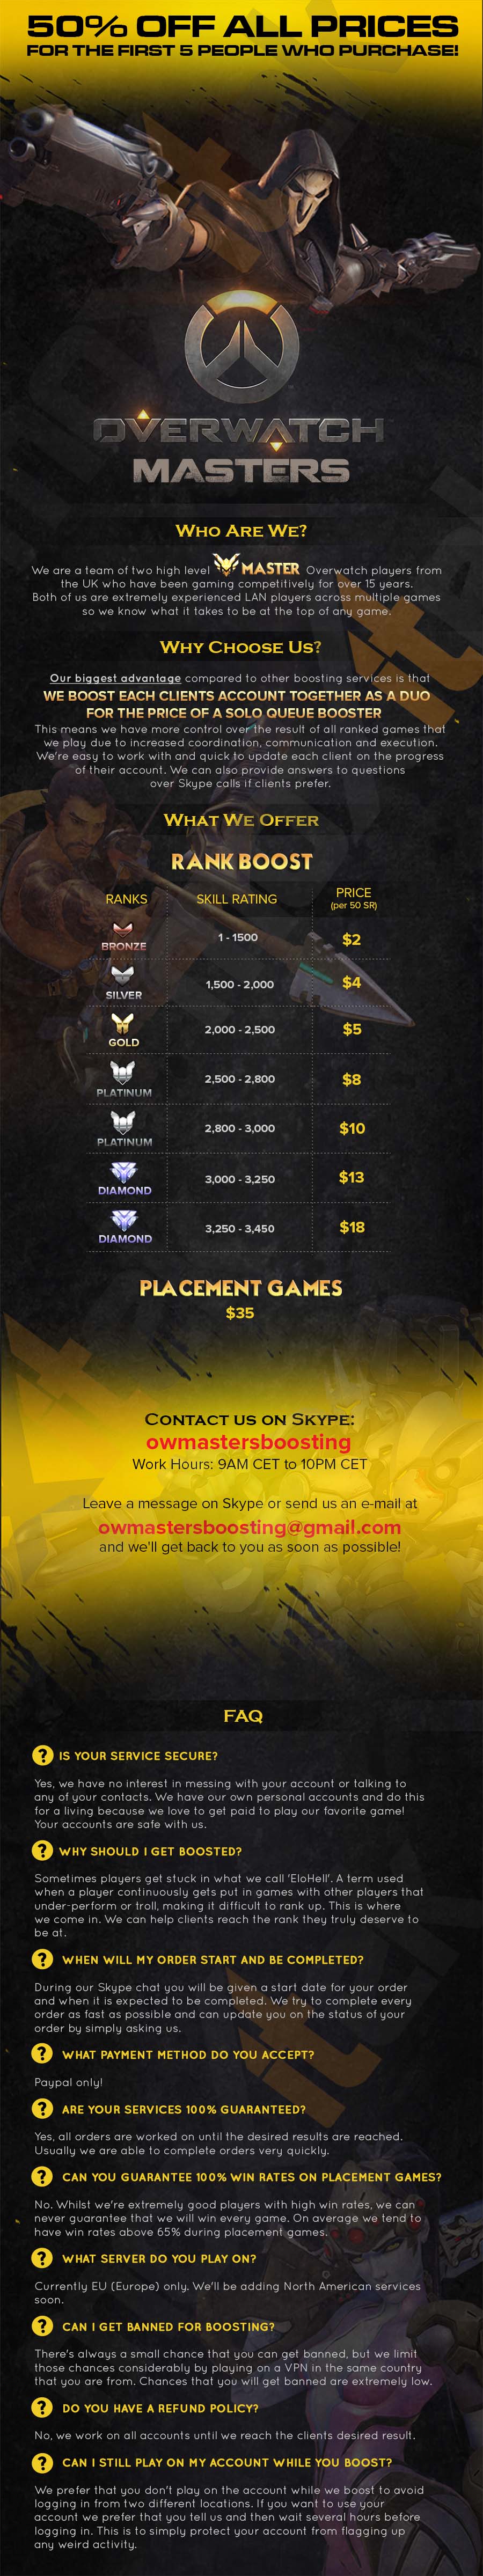 50% discounts Limited | Low Prices | SR Rank Boost | Placements-ntwao5u-jpg